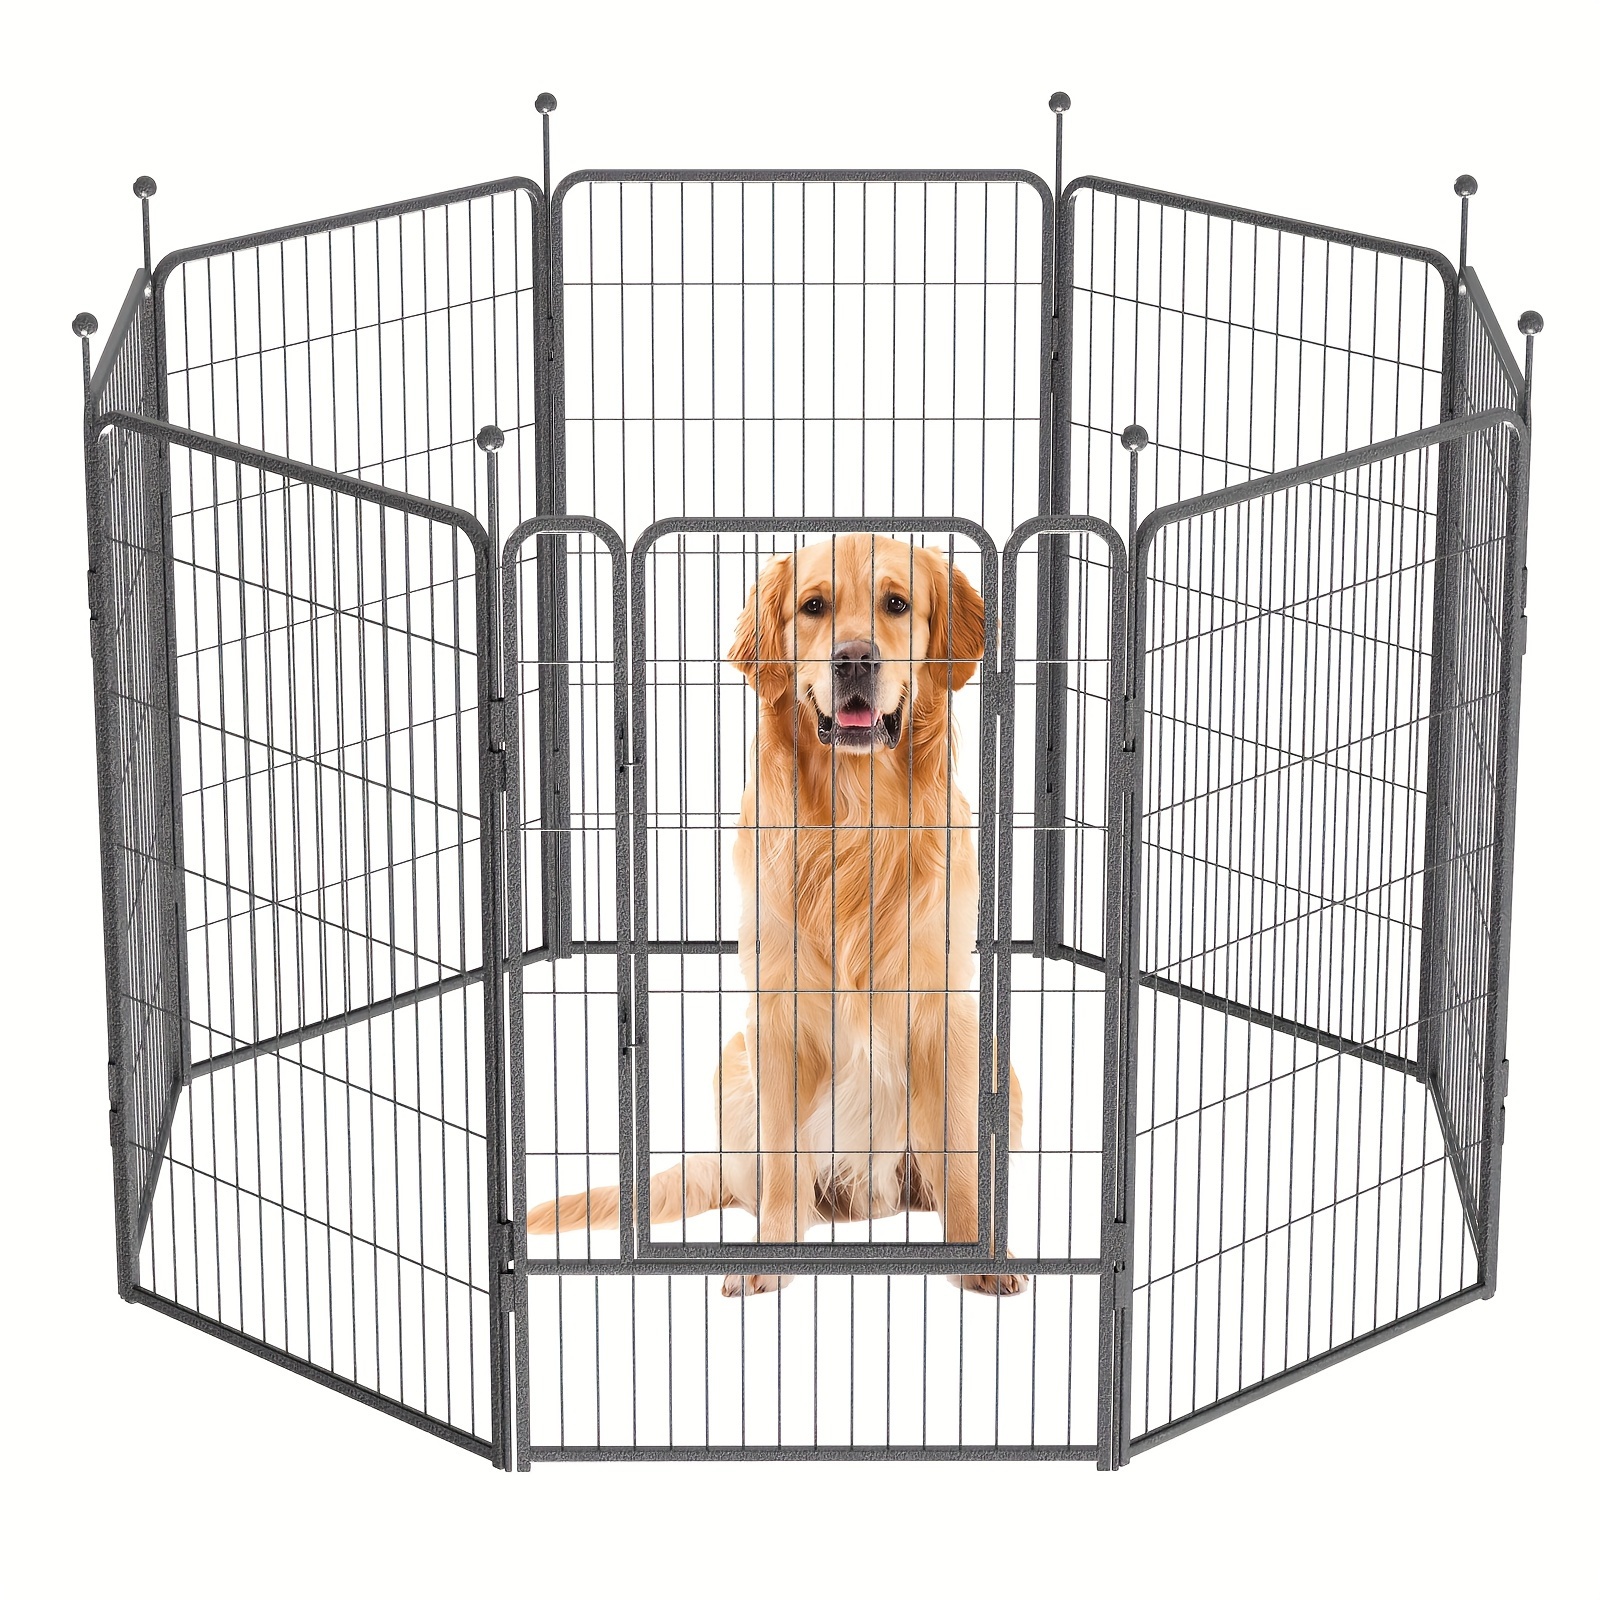 

Heavy-duty Metal Dog Playpen, 45-inch Outdoor Pet Fence, Portable Rv & Camping Dog Enclosure Fence